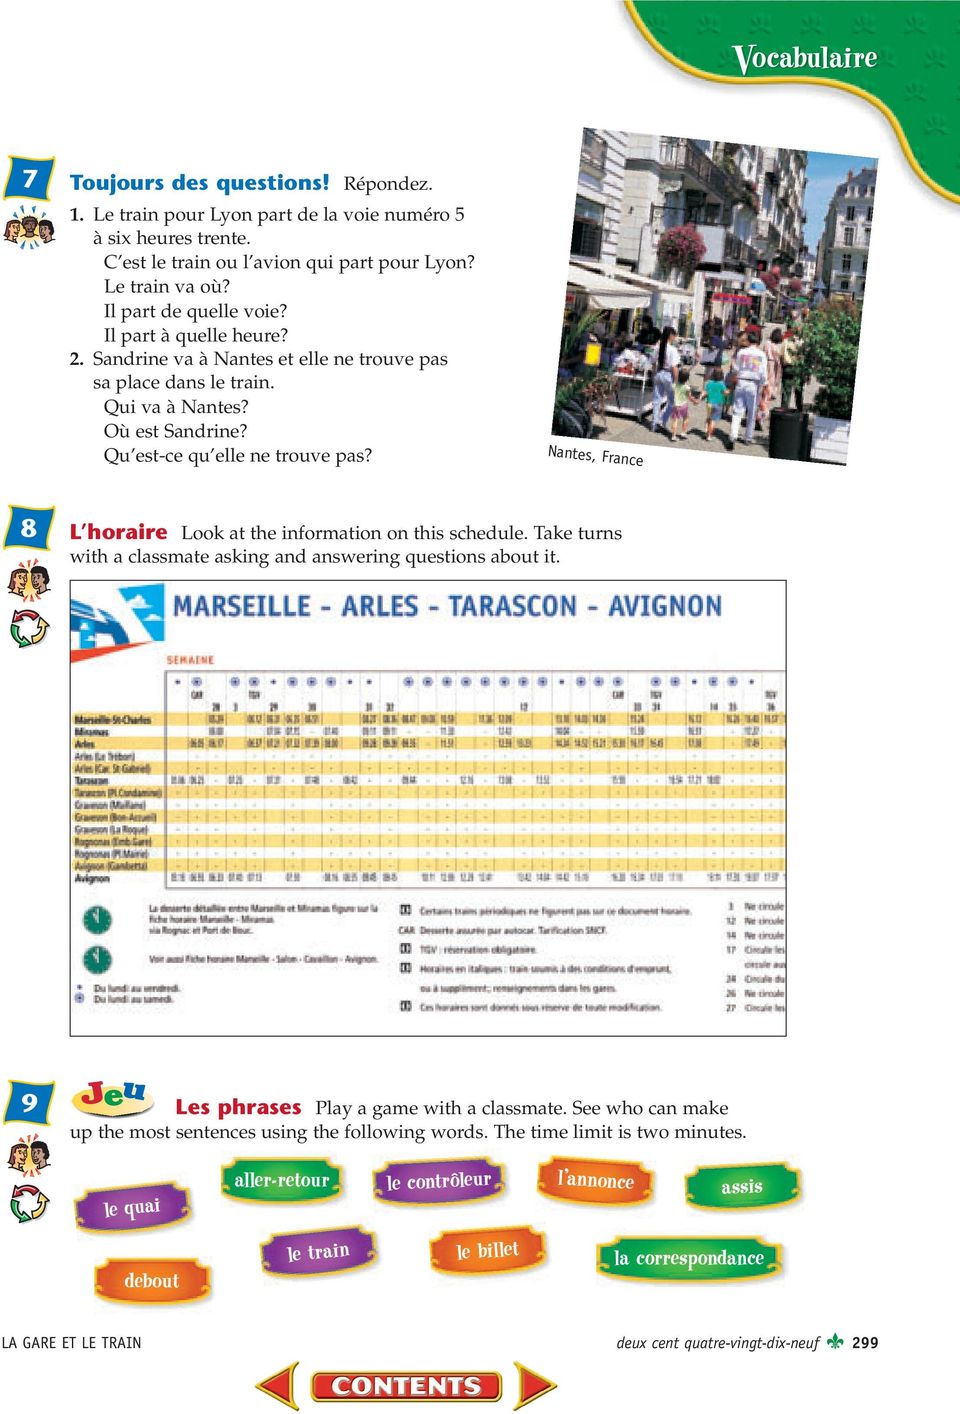 Nantes, France 8 L horaire Look at the information on this schedule. Take turns with a classmate asking and answering questions about it. 9 Les phrases Play a game with a classmate.